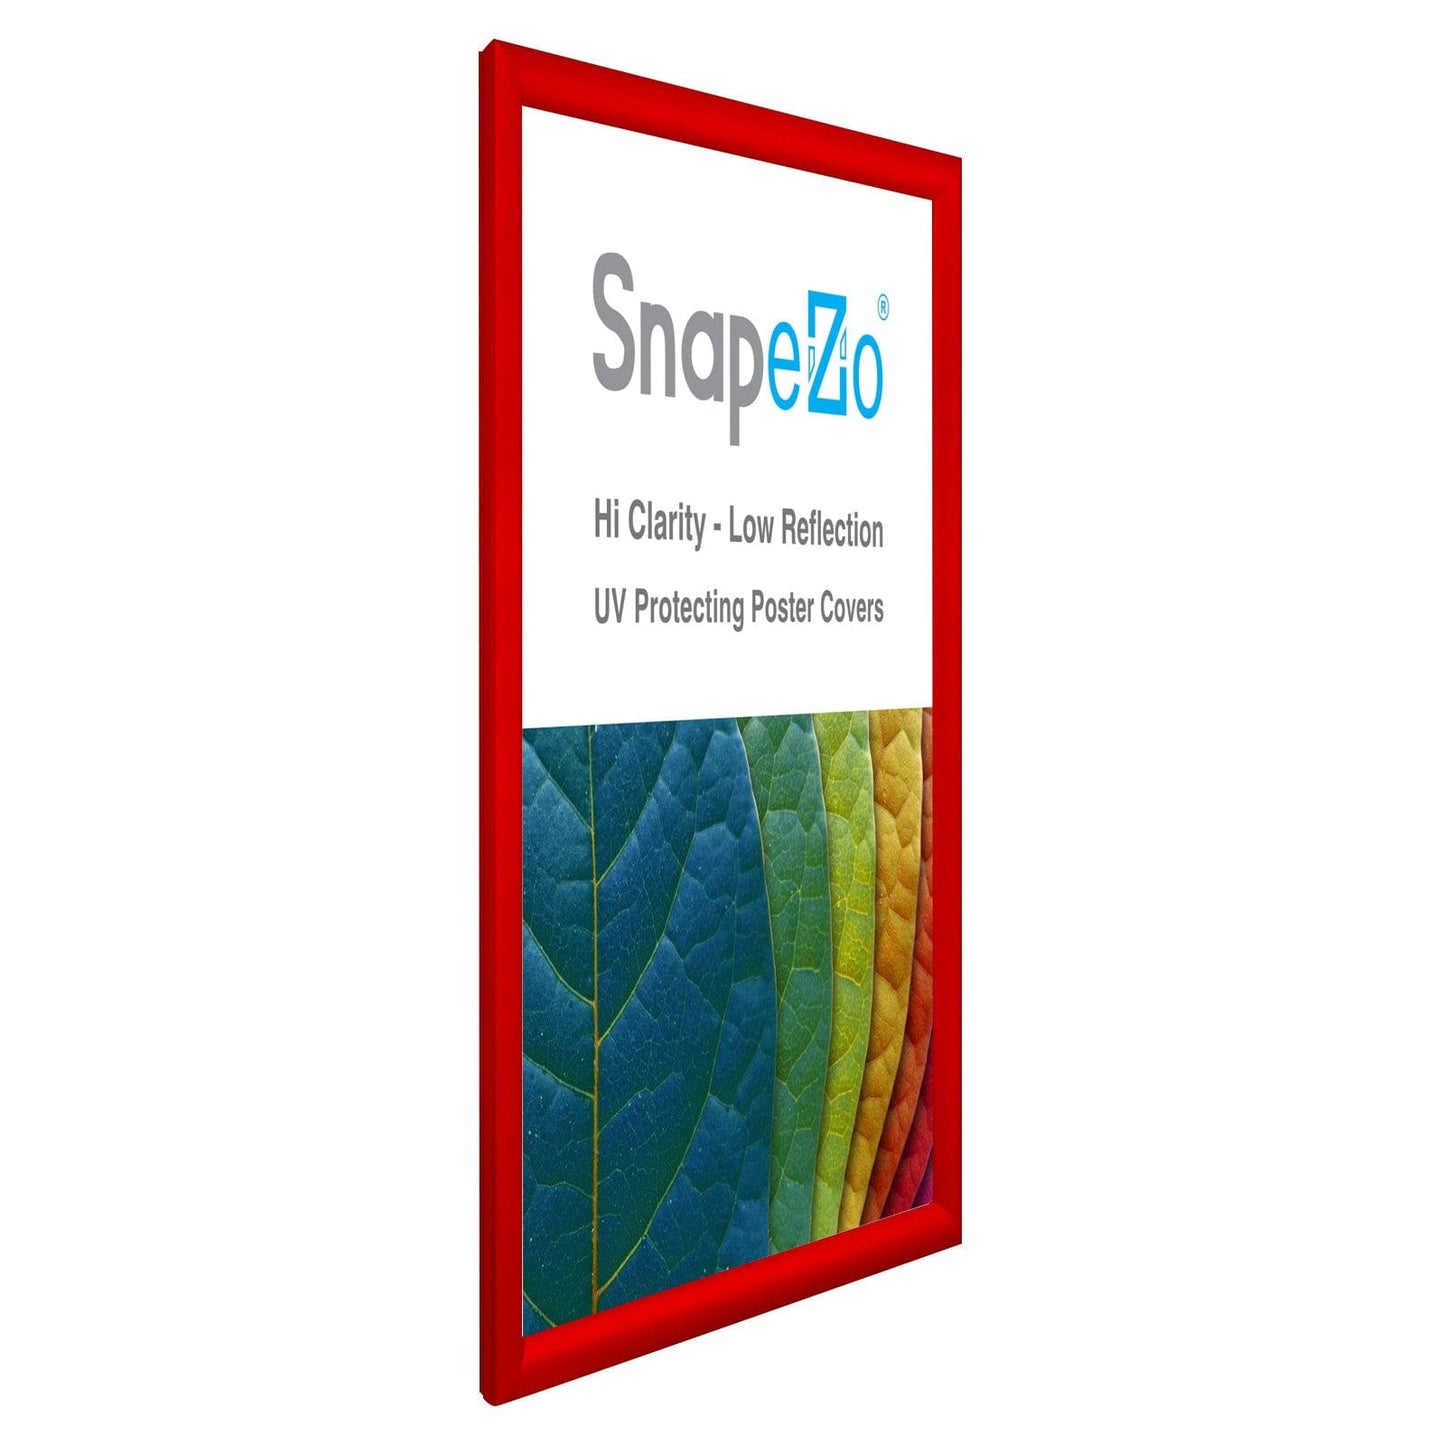 19x25 Red SnapeZo® Snap Frame - 1.2" Profile - Snap Frames Direct